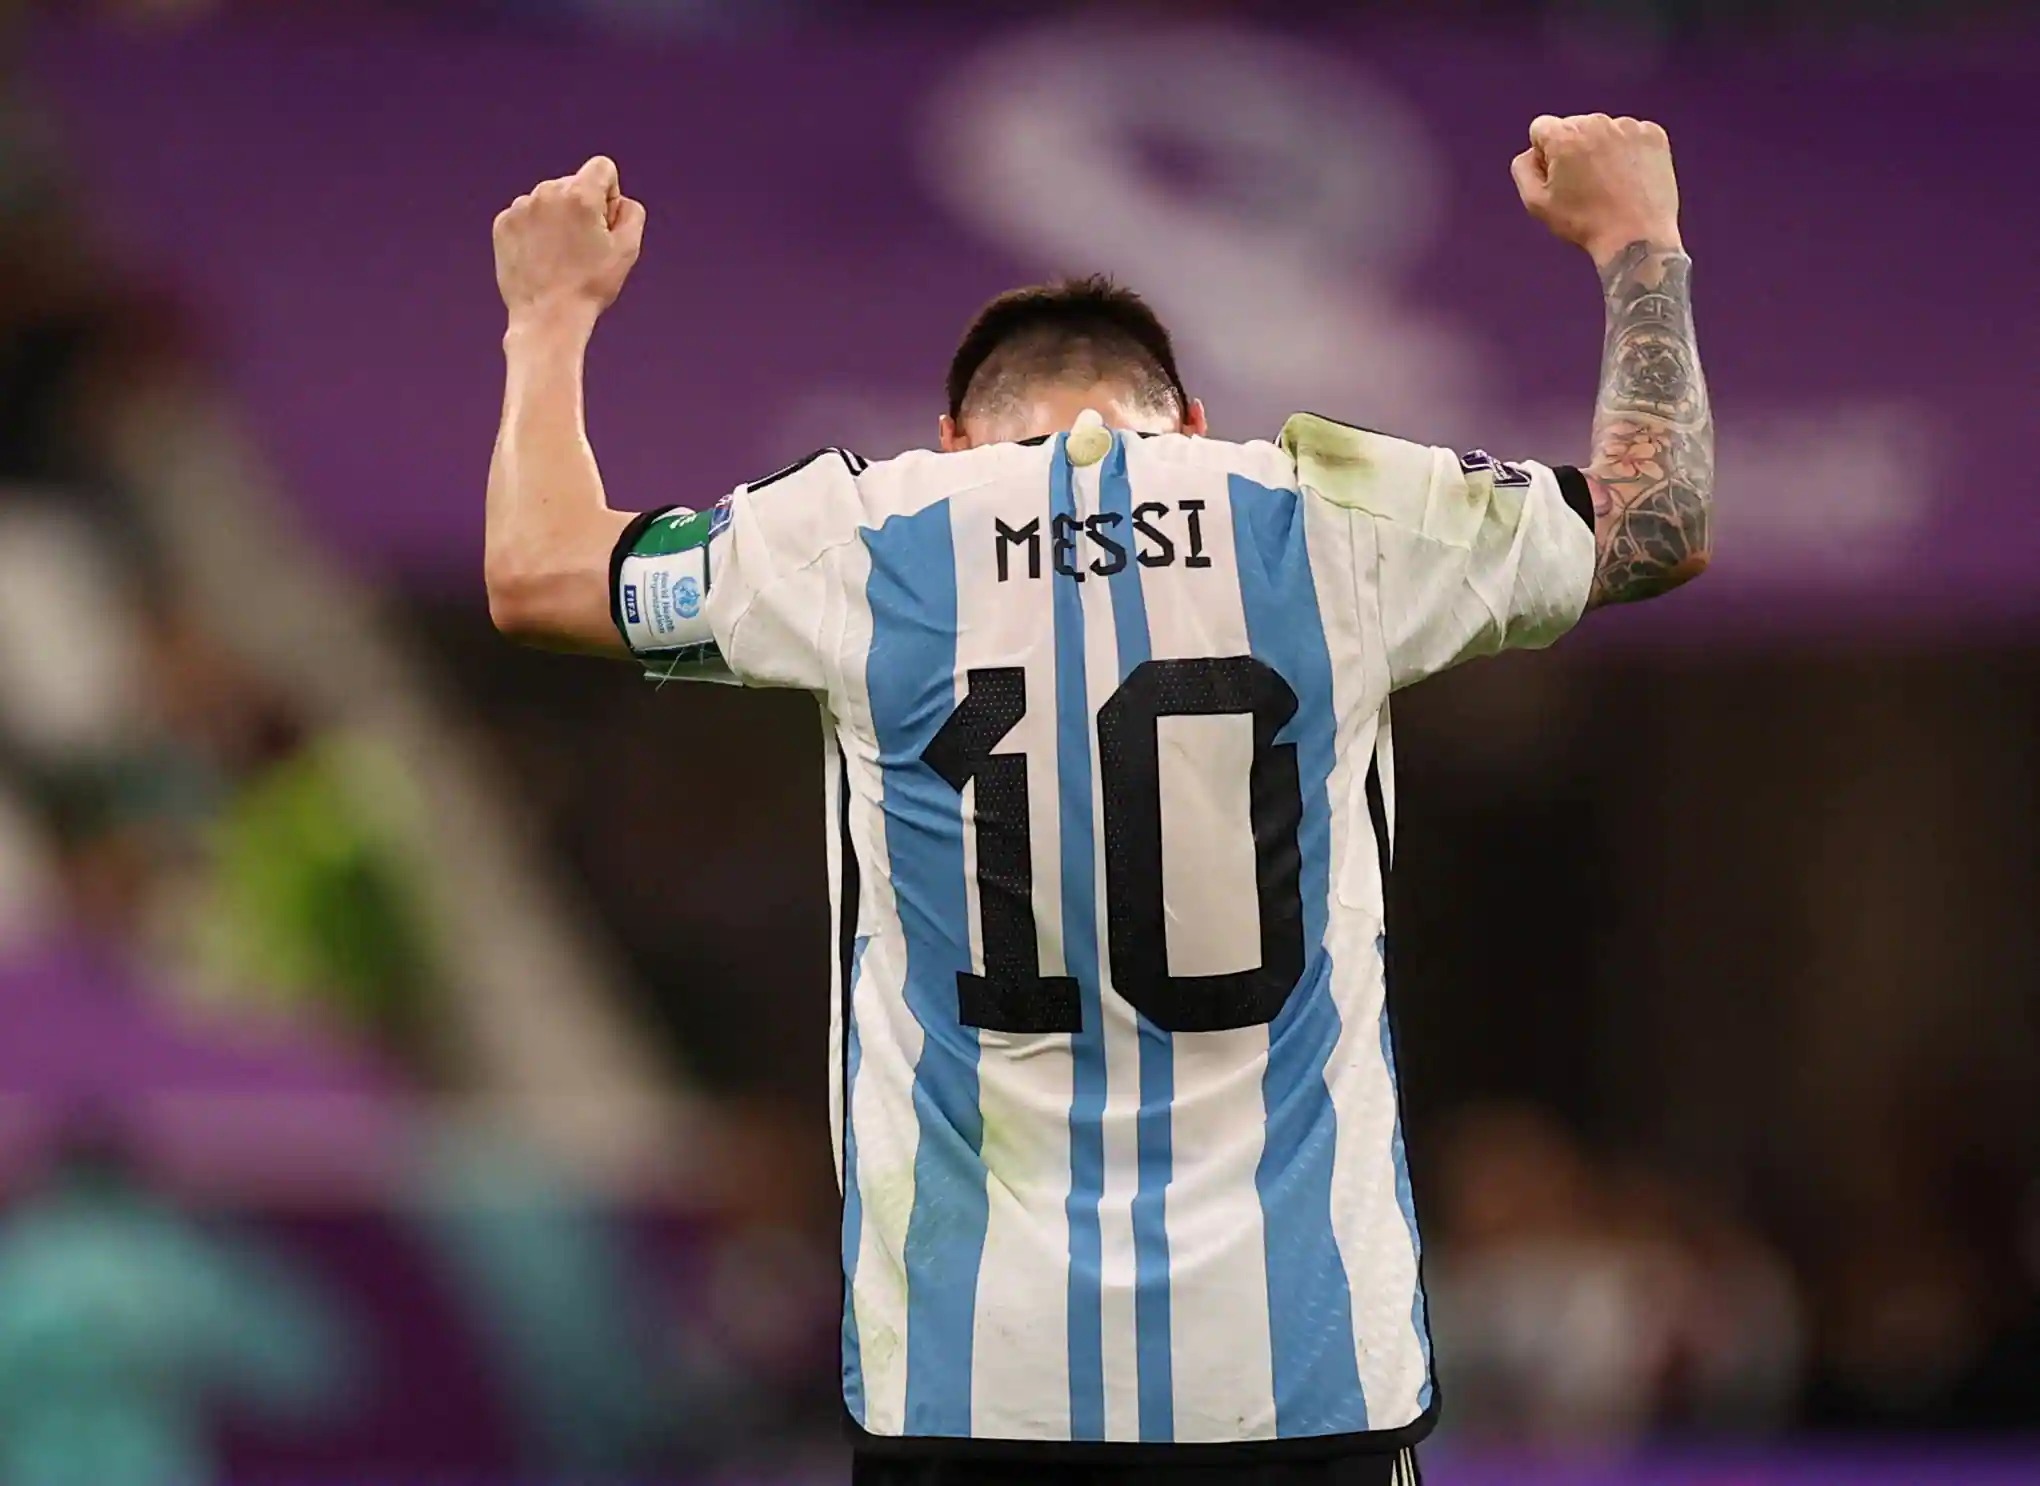 Congratulations to Messi and Argentina, the 2022 World Cup champions! (2)